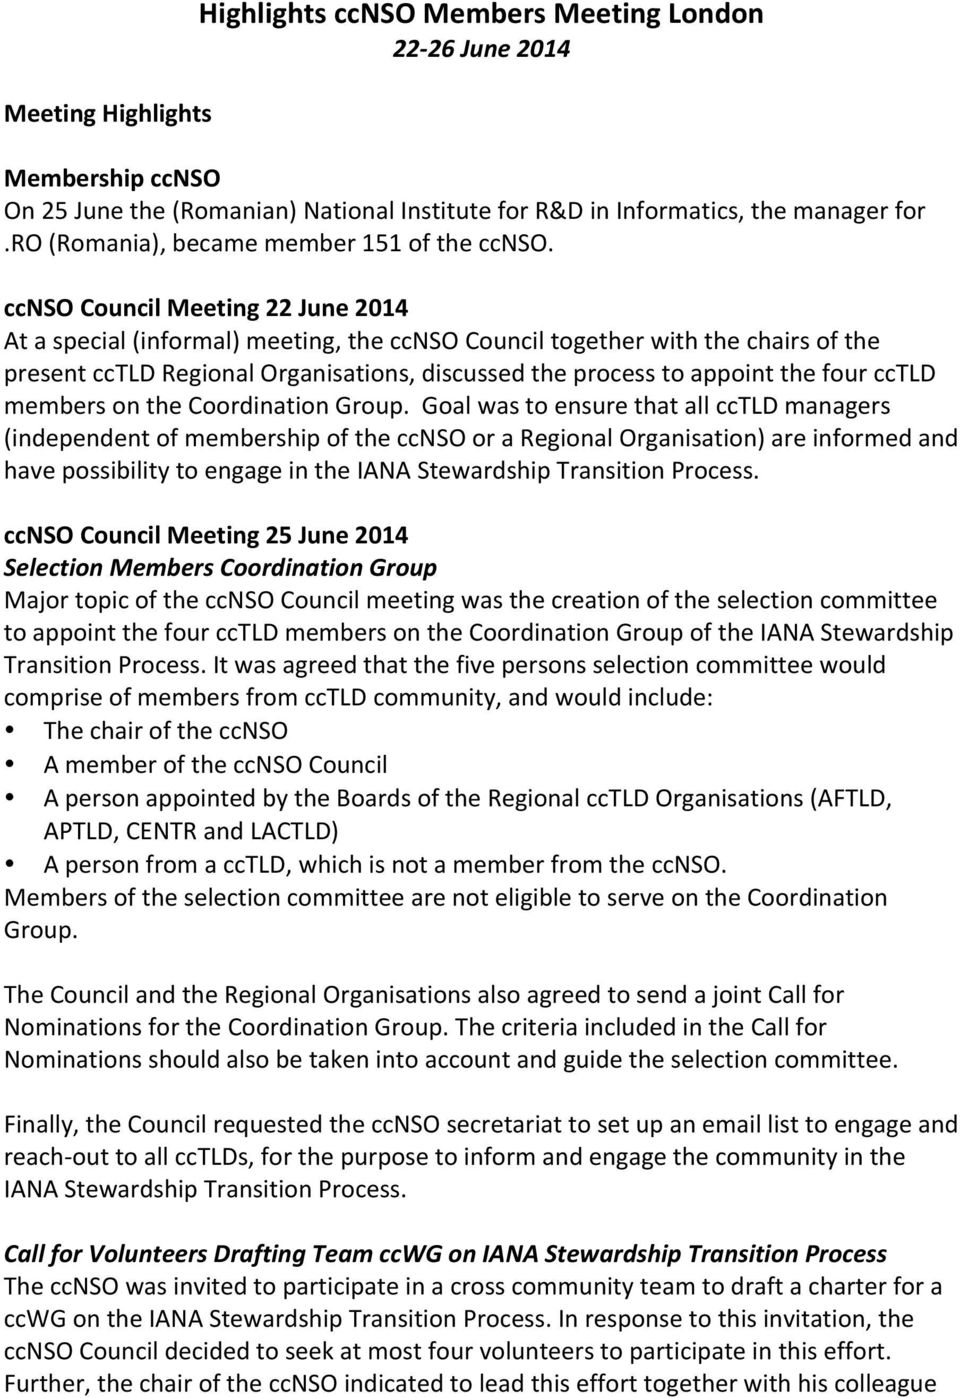 ccnso Council Meeting 22 June 2014 At a special (informal) meeting, the ccnso Council together with the chairs of the present cctld Regional Organisations, discussed the process to appoint the four